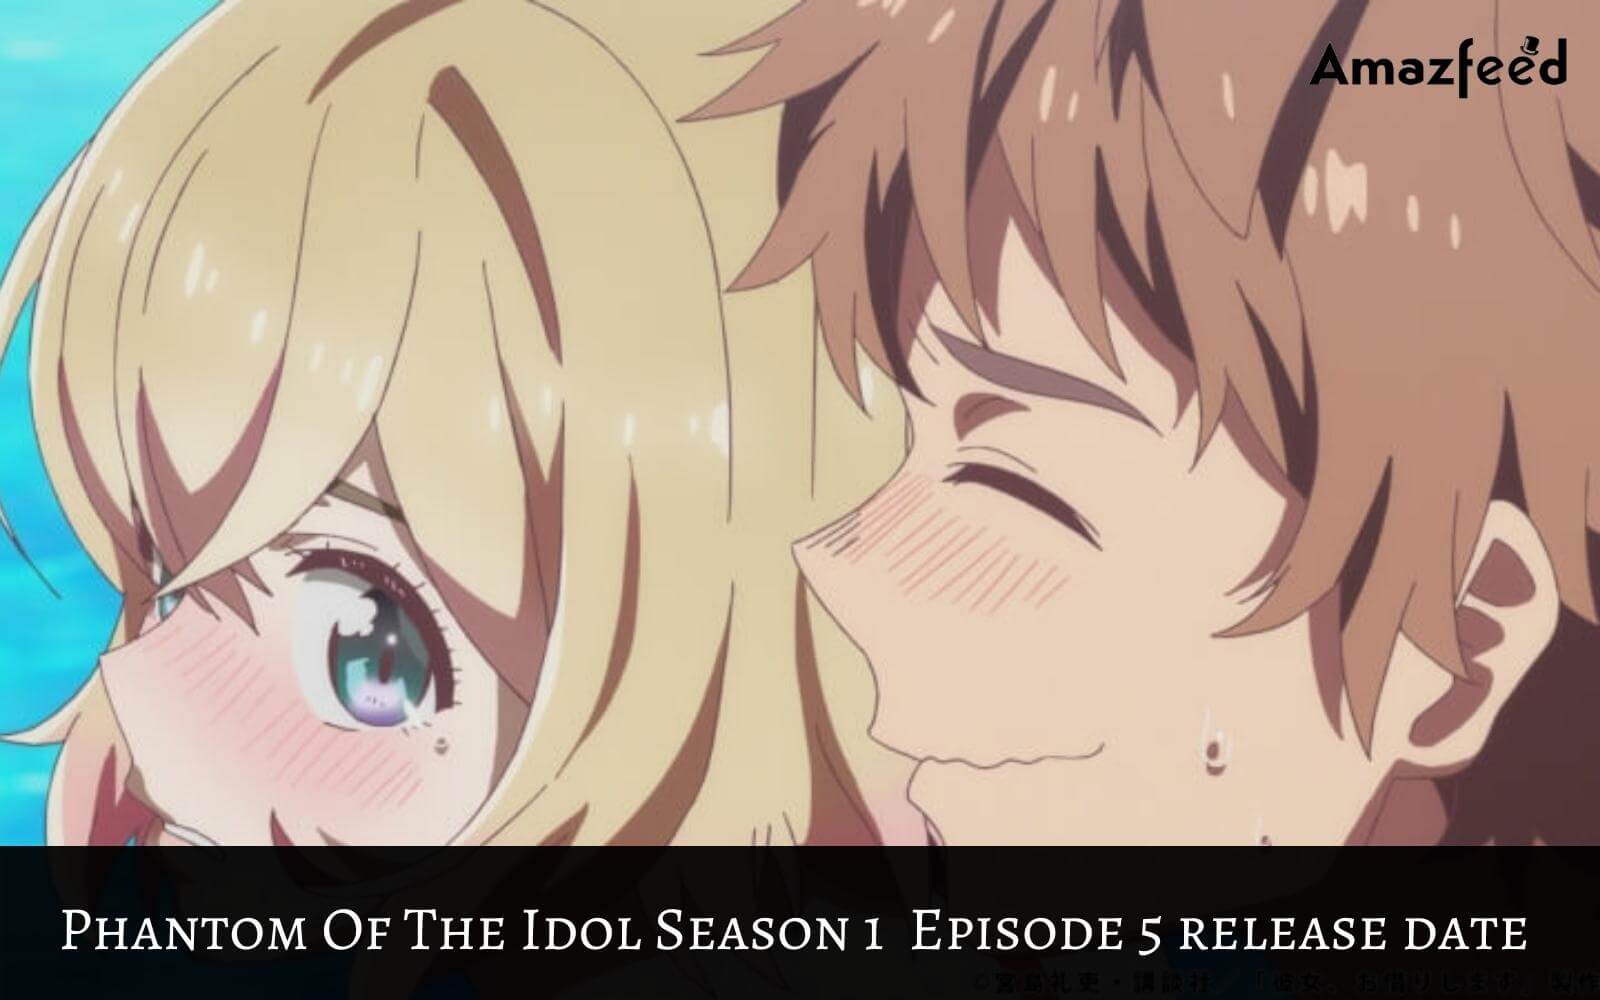 Phantom Of The Idol Season 1 Episode 5: Countdown, Release Date, Spoiler, and Cast